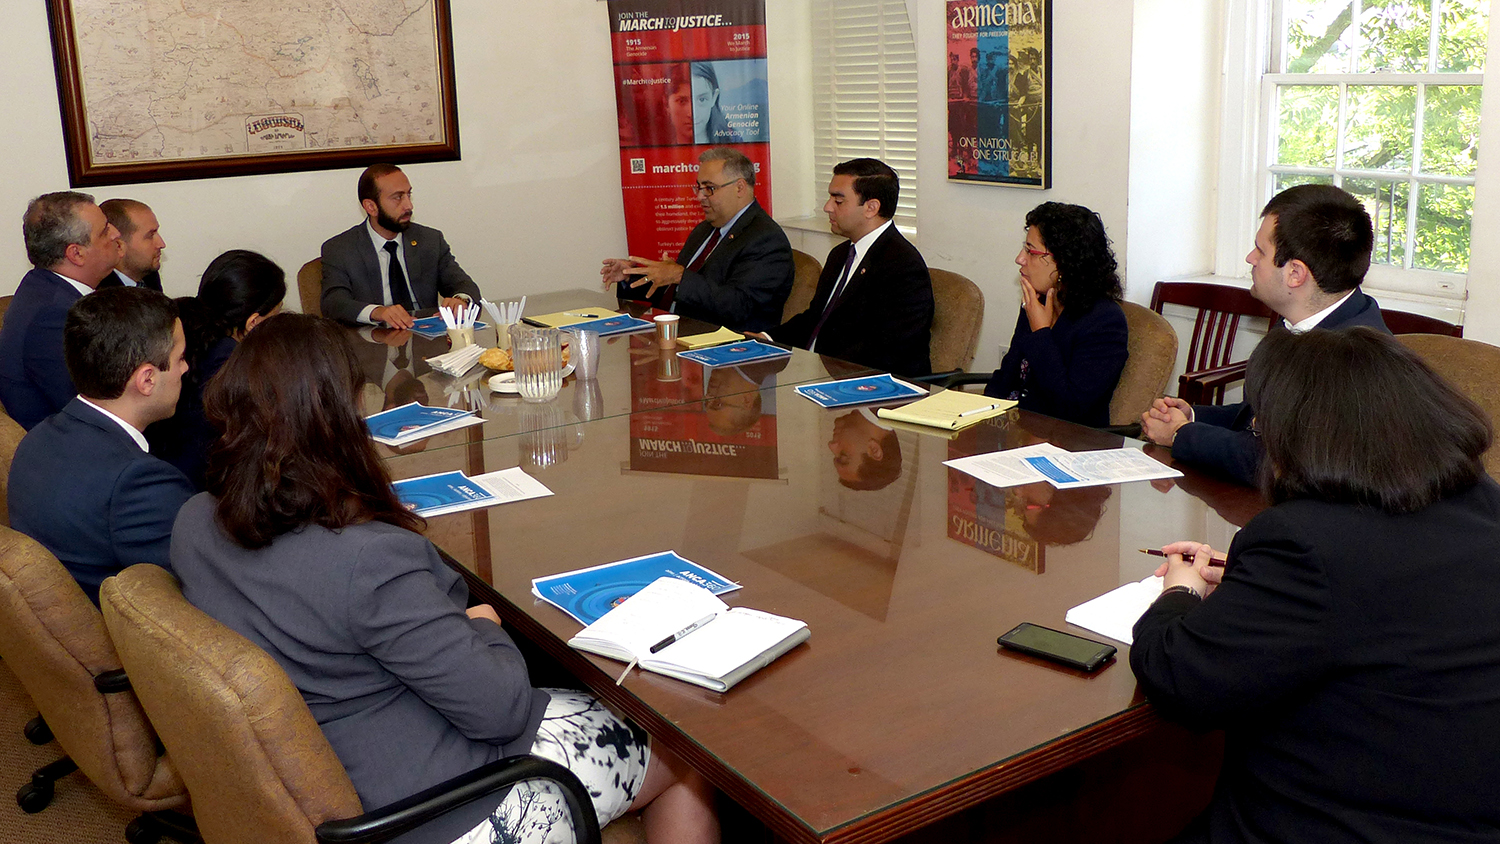 ANCA discusses policy priorities with Armenia’s First Deputy Prime Minister Ararat Mirzoyan